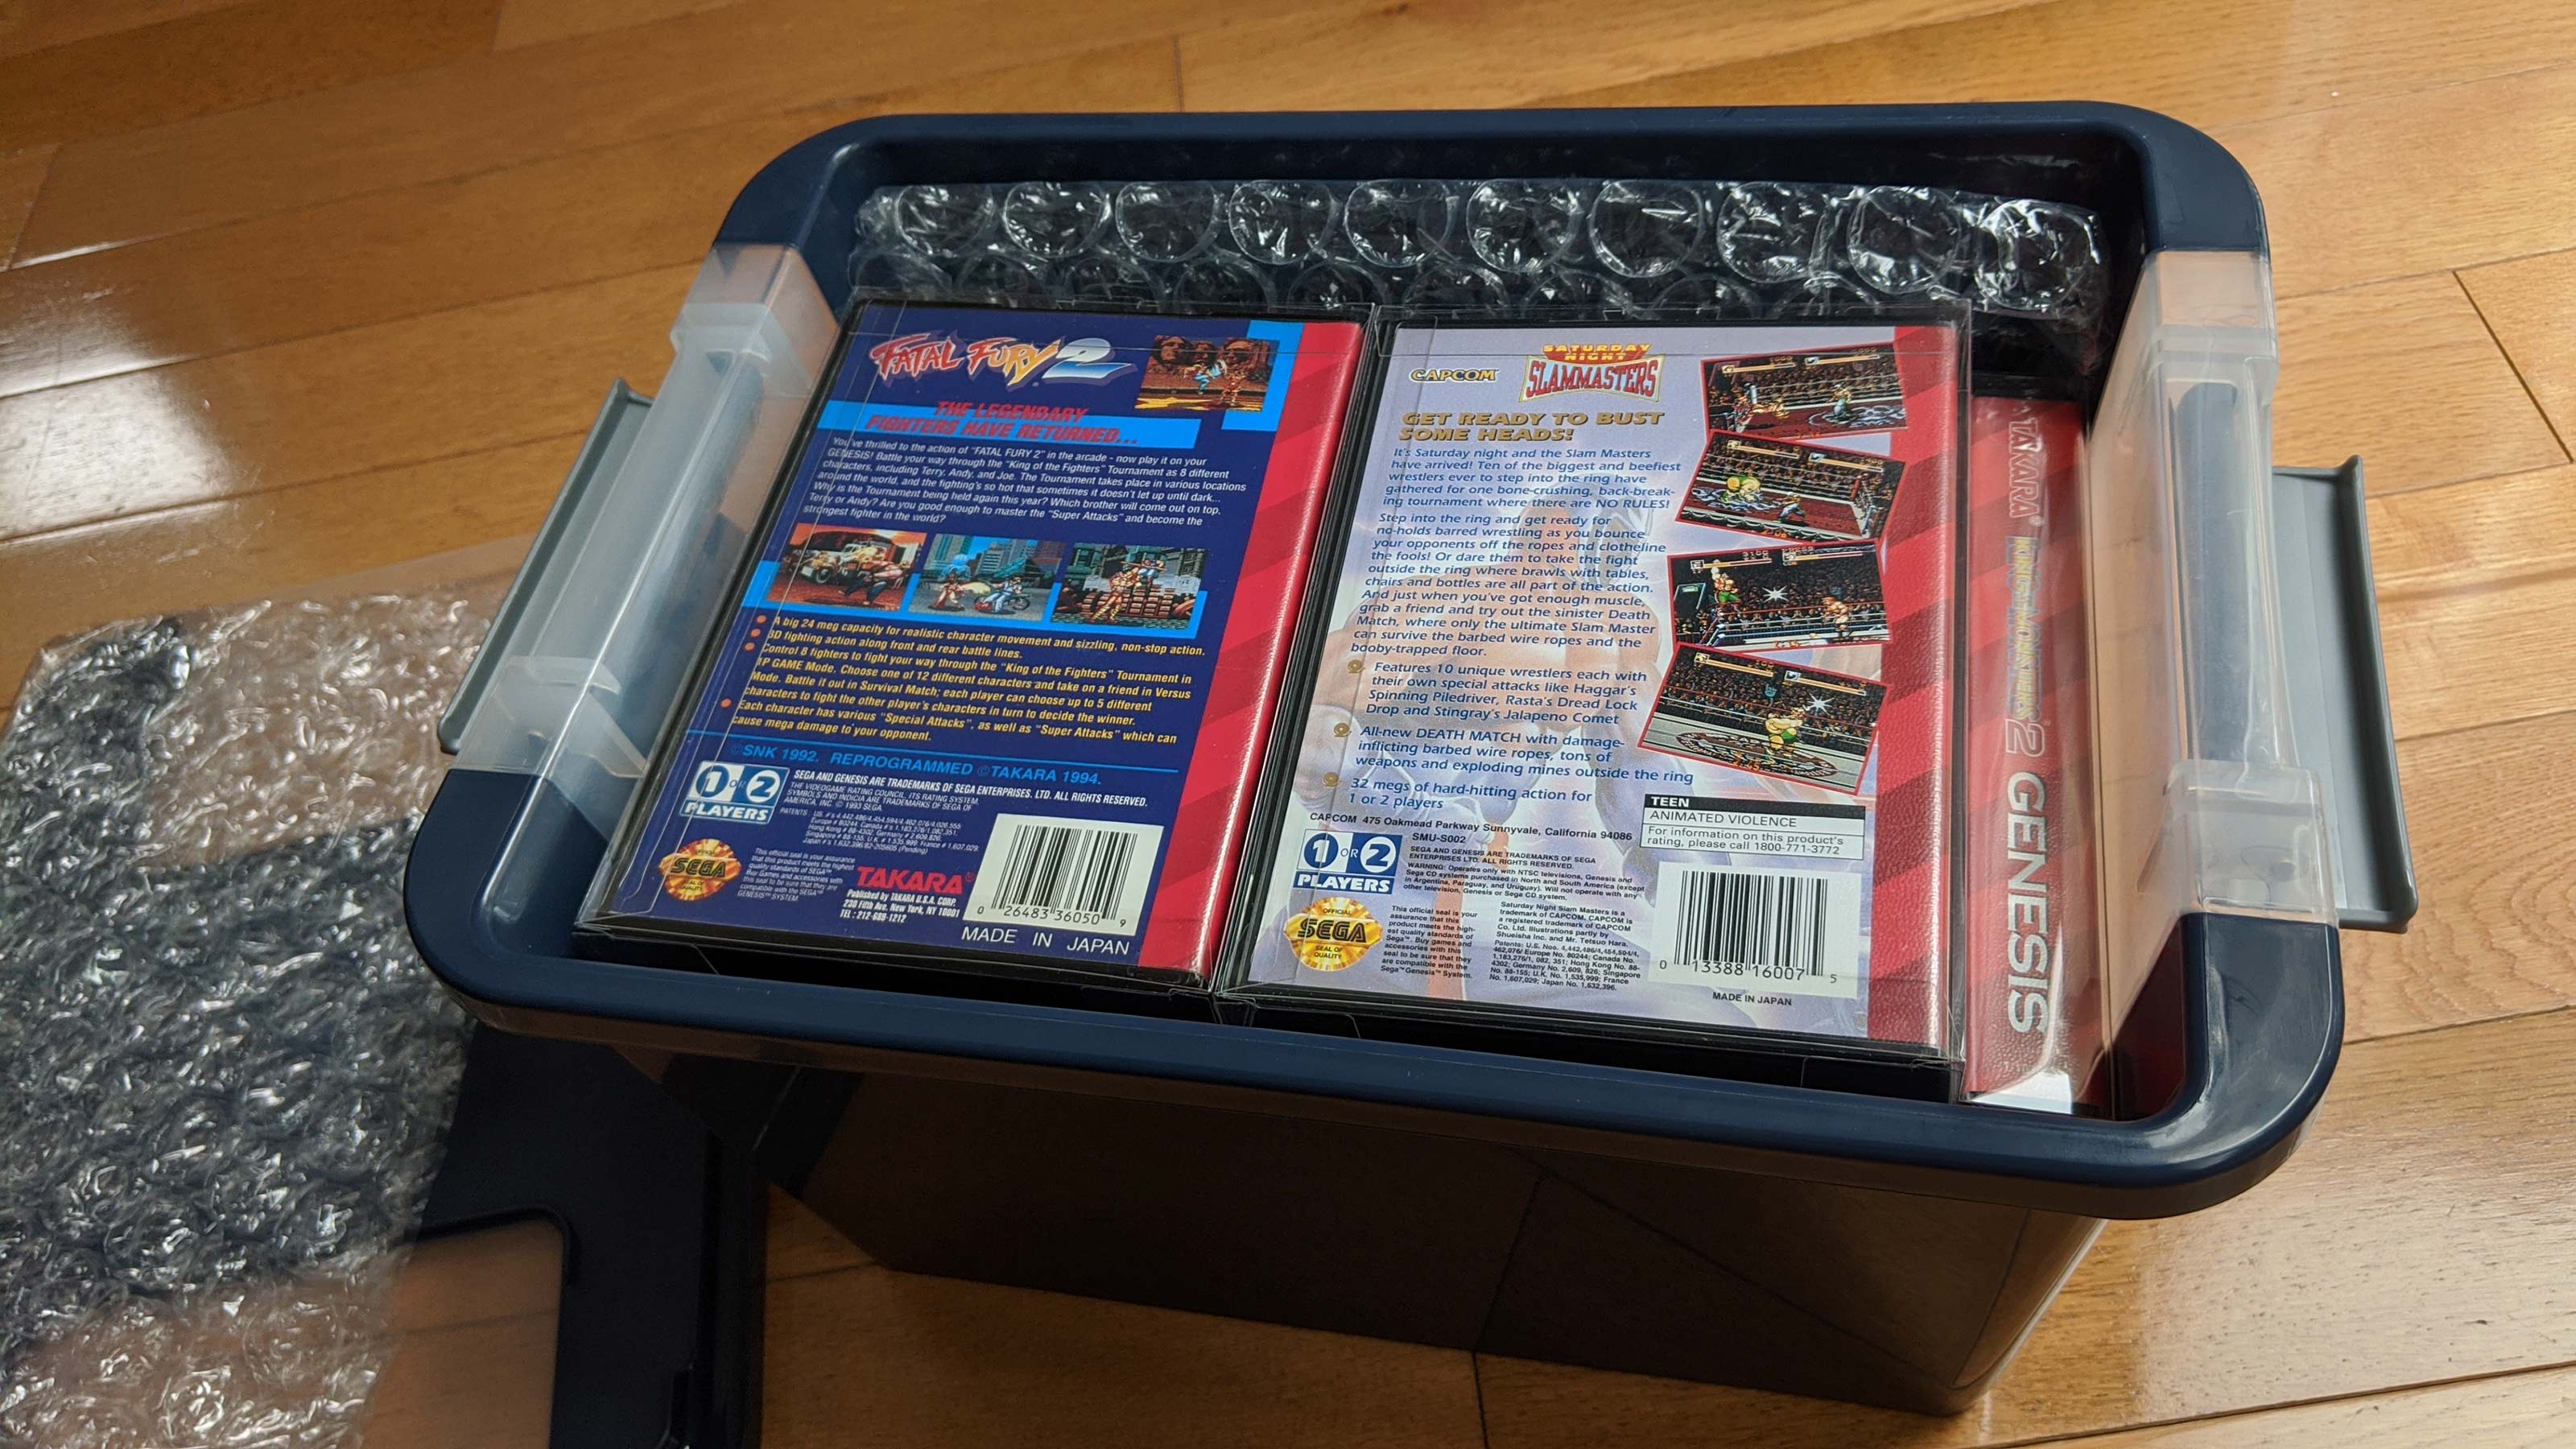 Fresh Ideas for Compact & Protective Console Game Storage - RetroGaming  with Racketboy